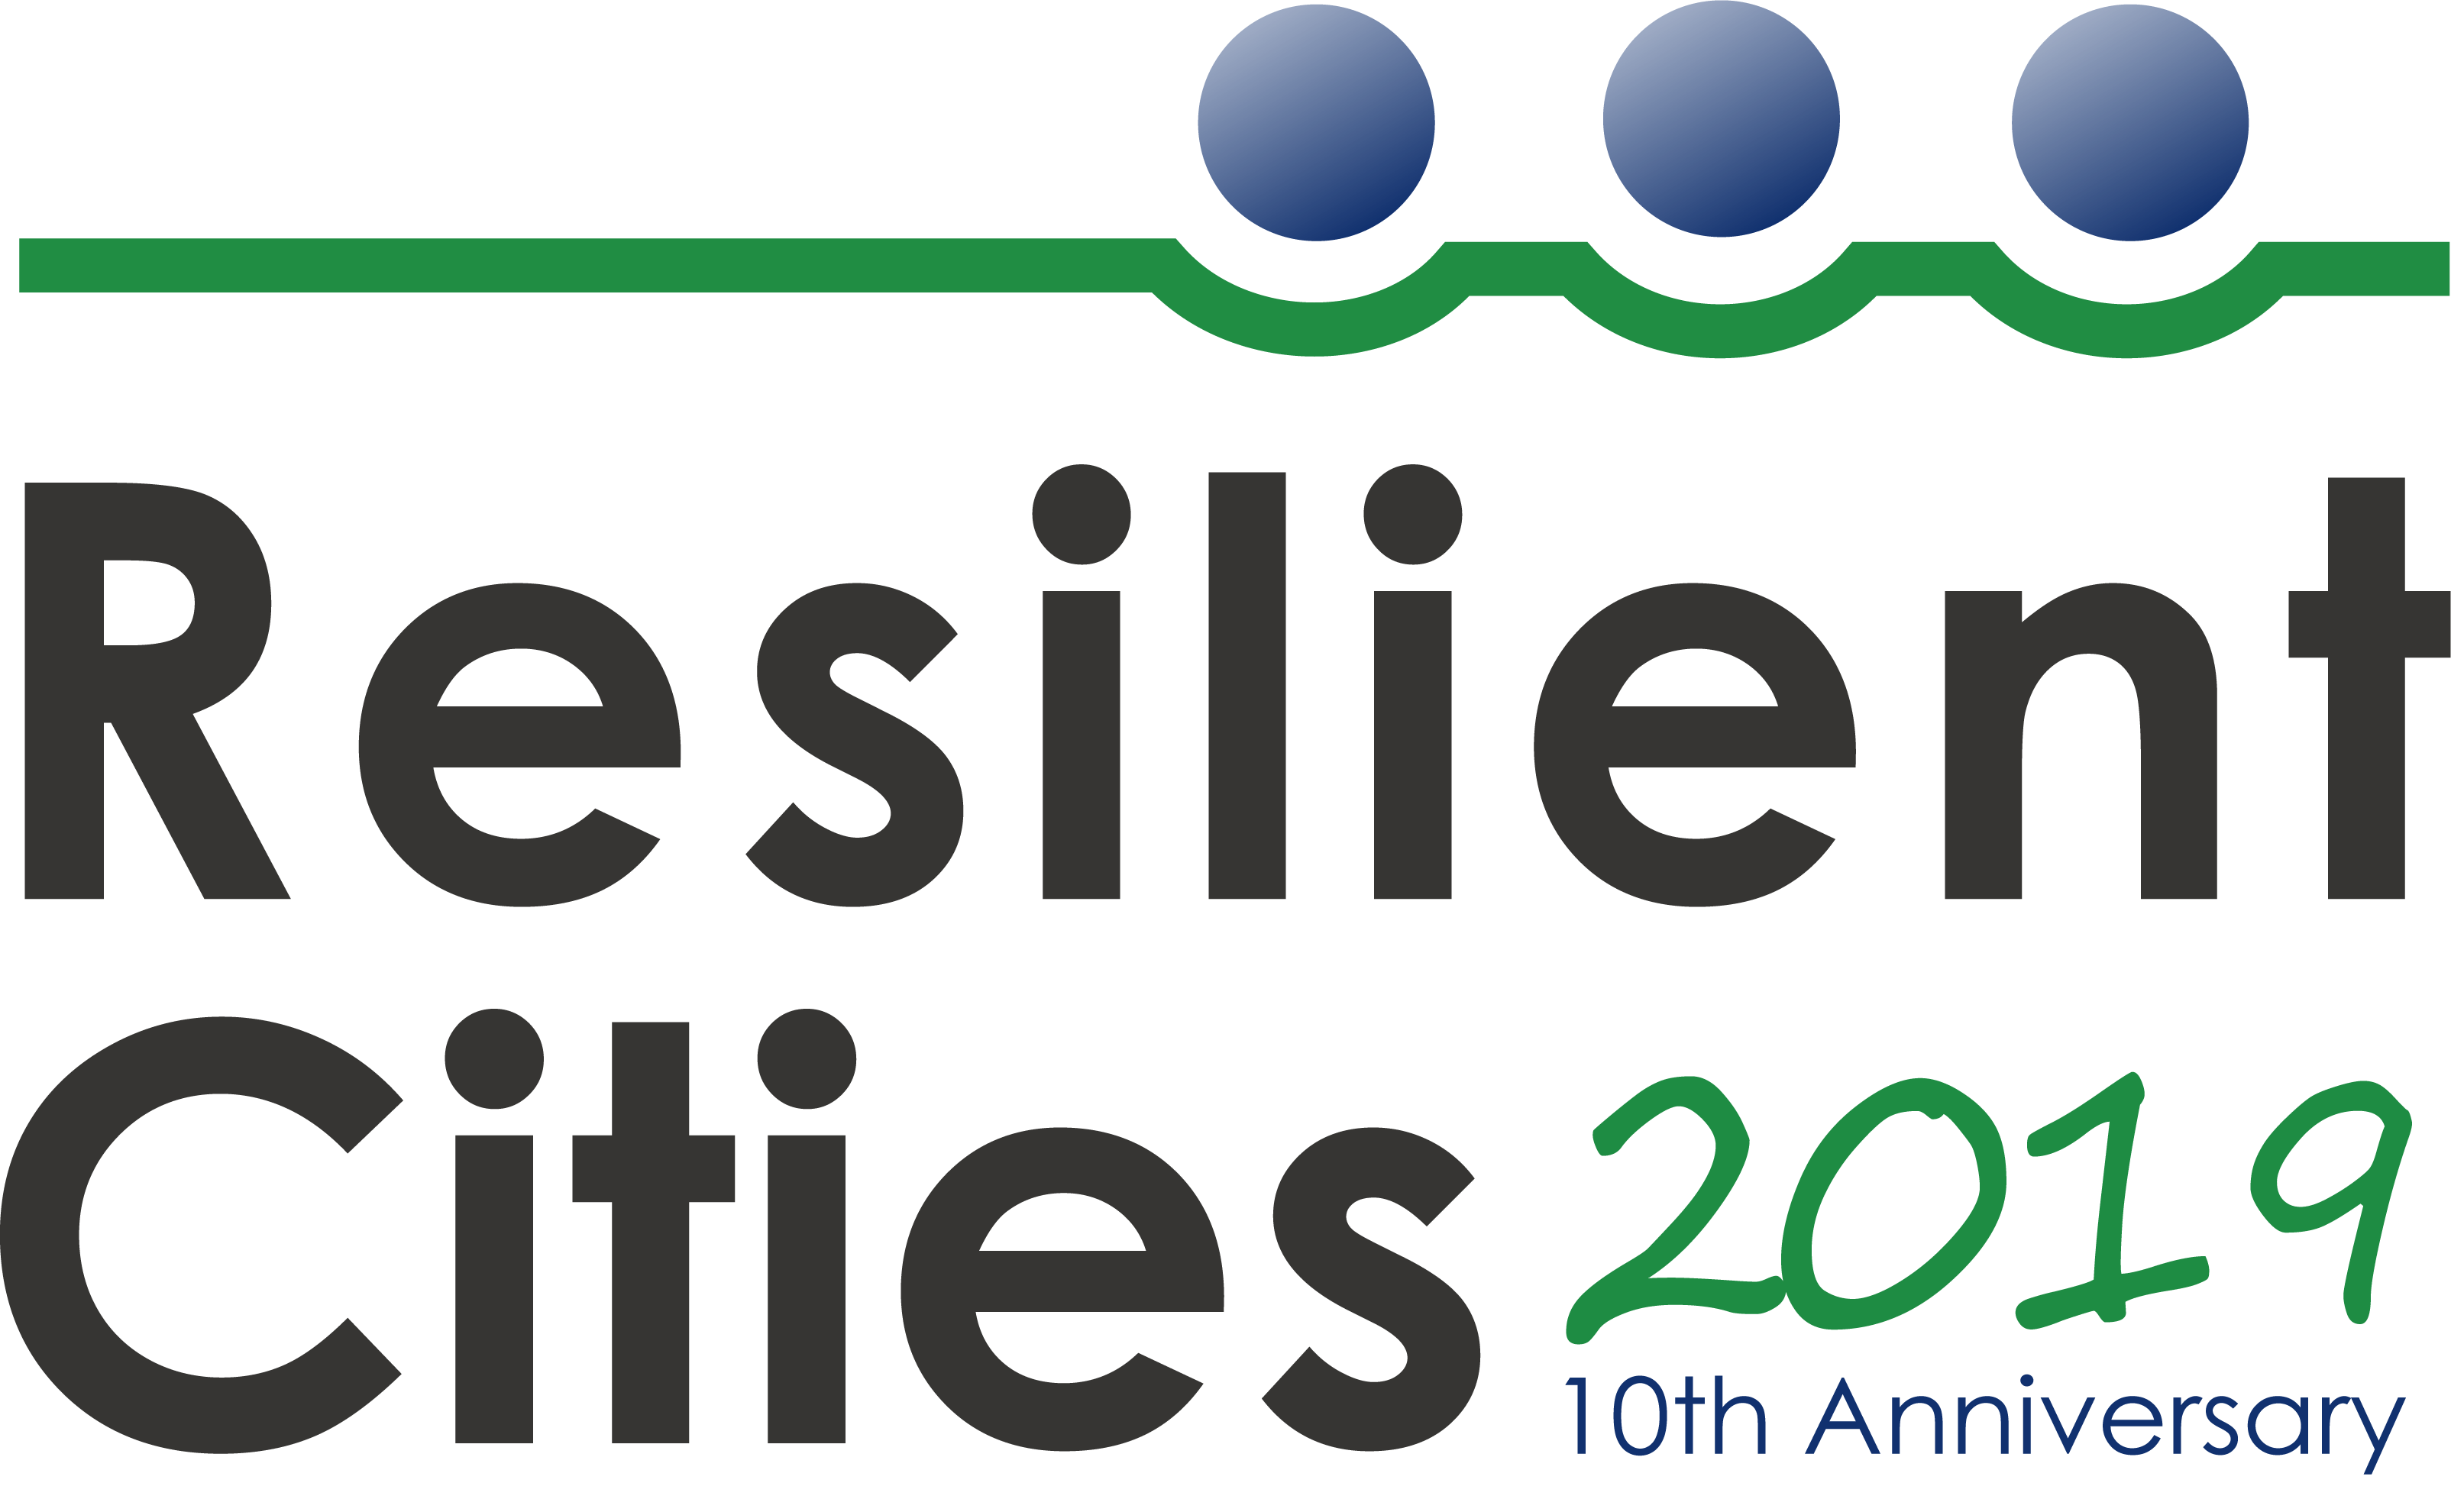 Resilient Cities 2019